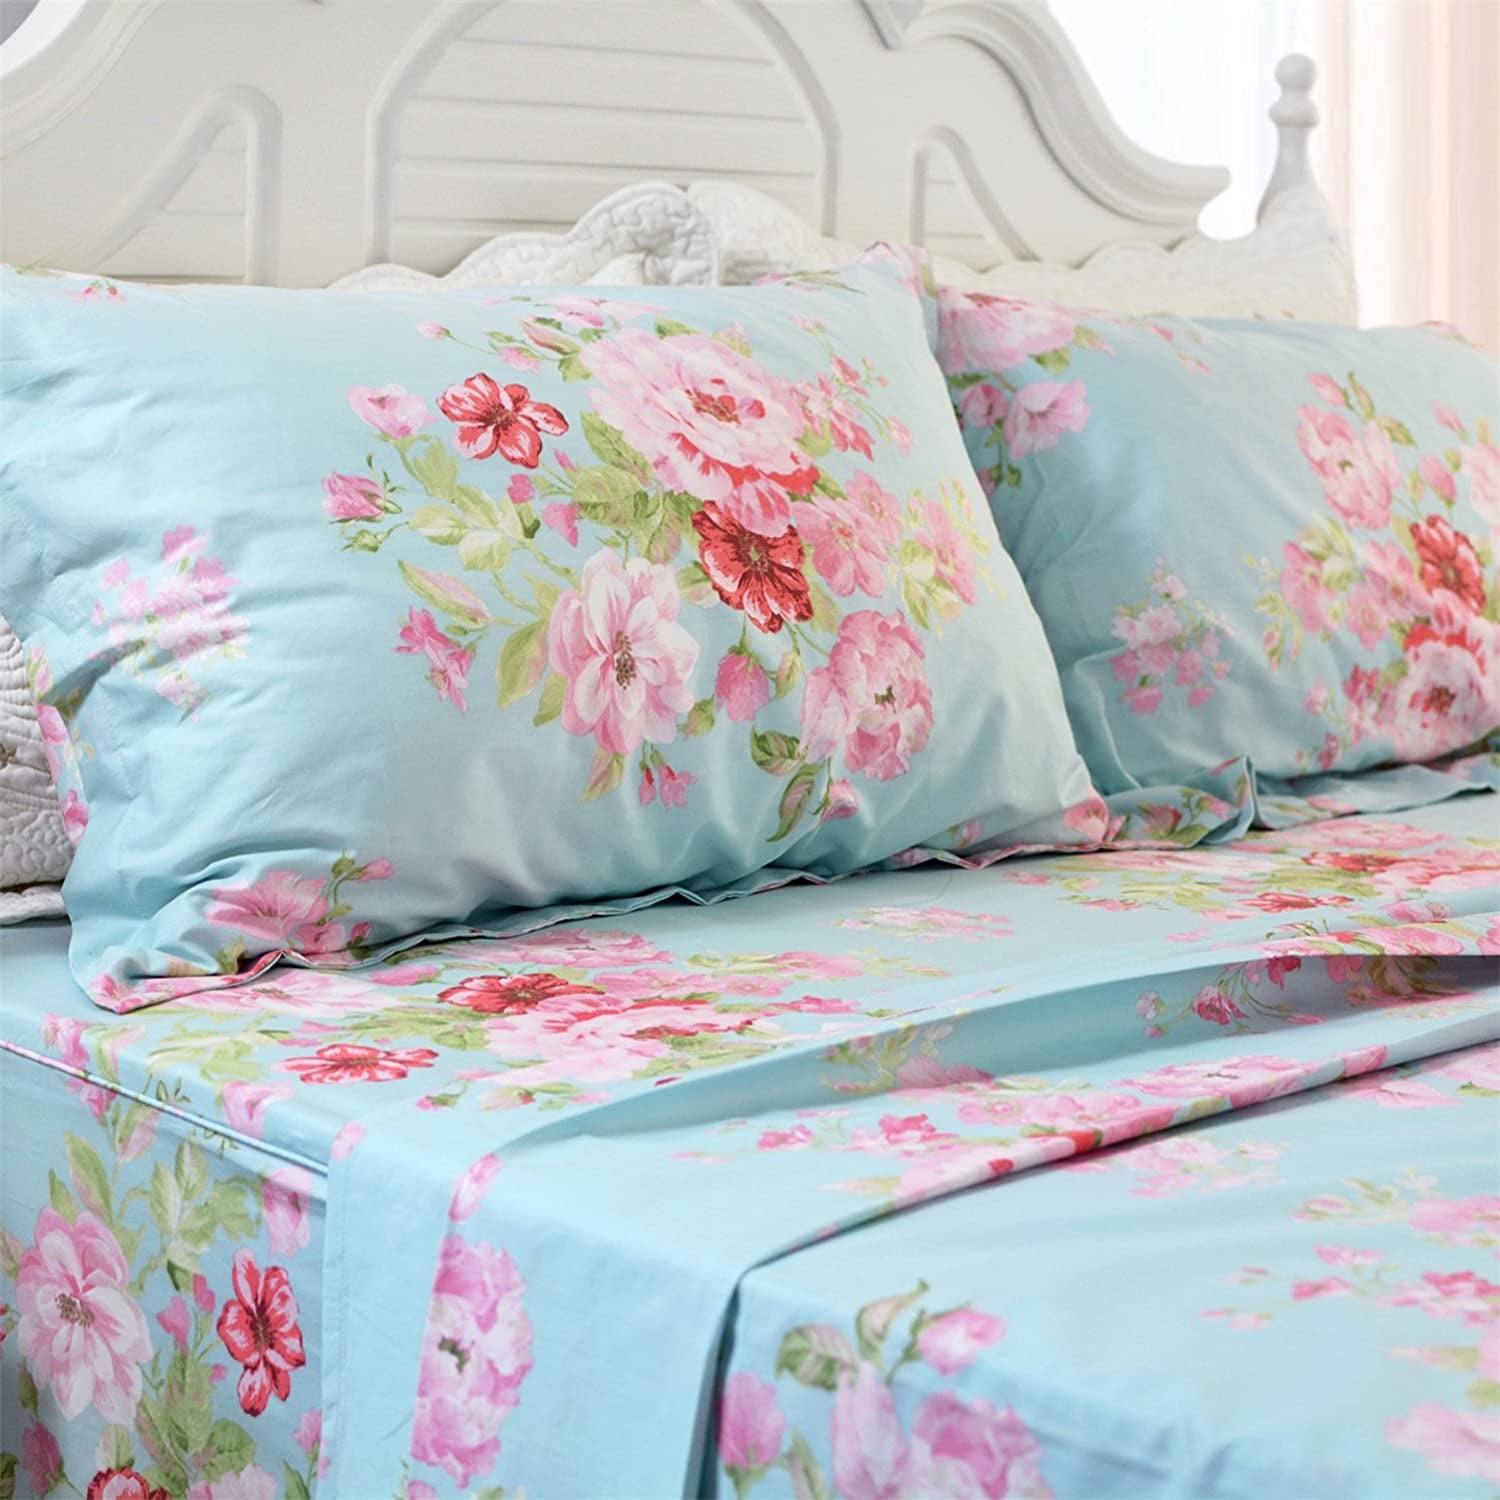 FADFAY Shabby Pink Floral Blue Fitted Sheet Deep Pocket 100% Cotton Super Soft,Single Fitted Sheet Without Pillowcases.Queen Size 1-Piece